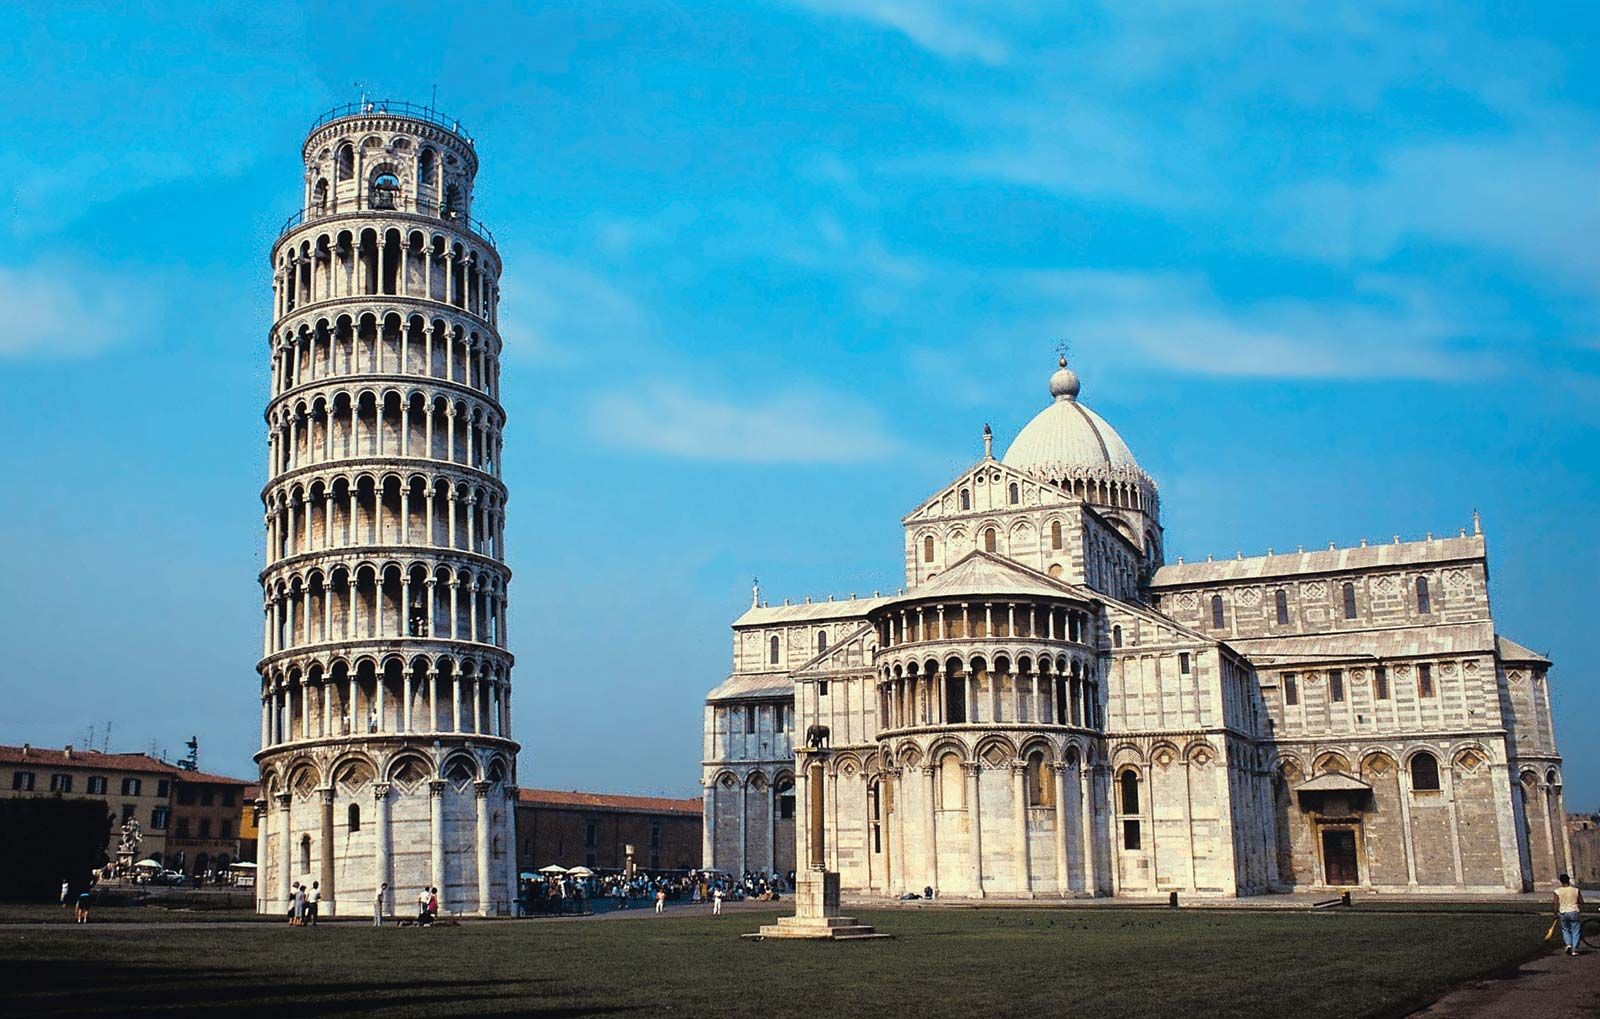 why does the leaning tower of pisa lean